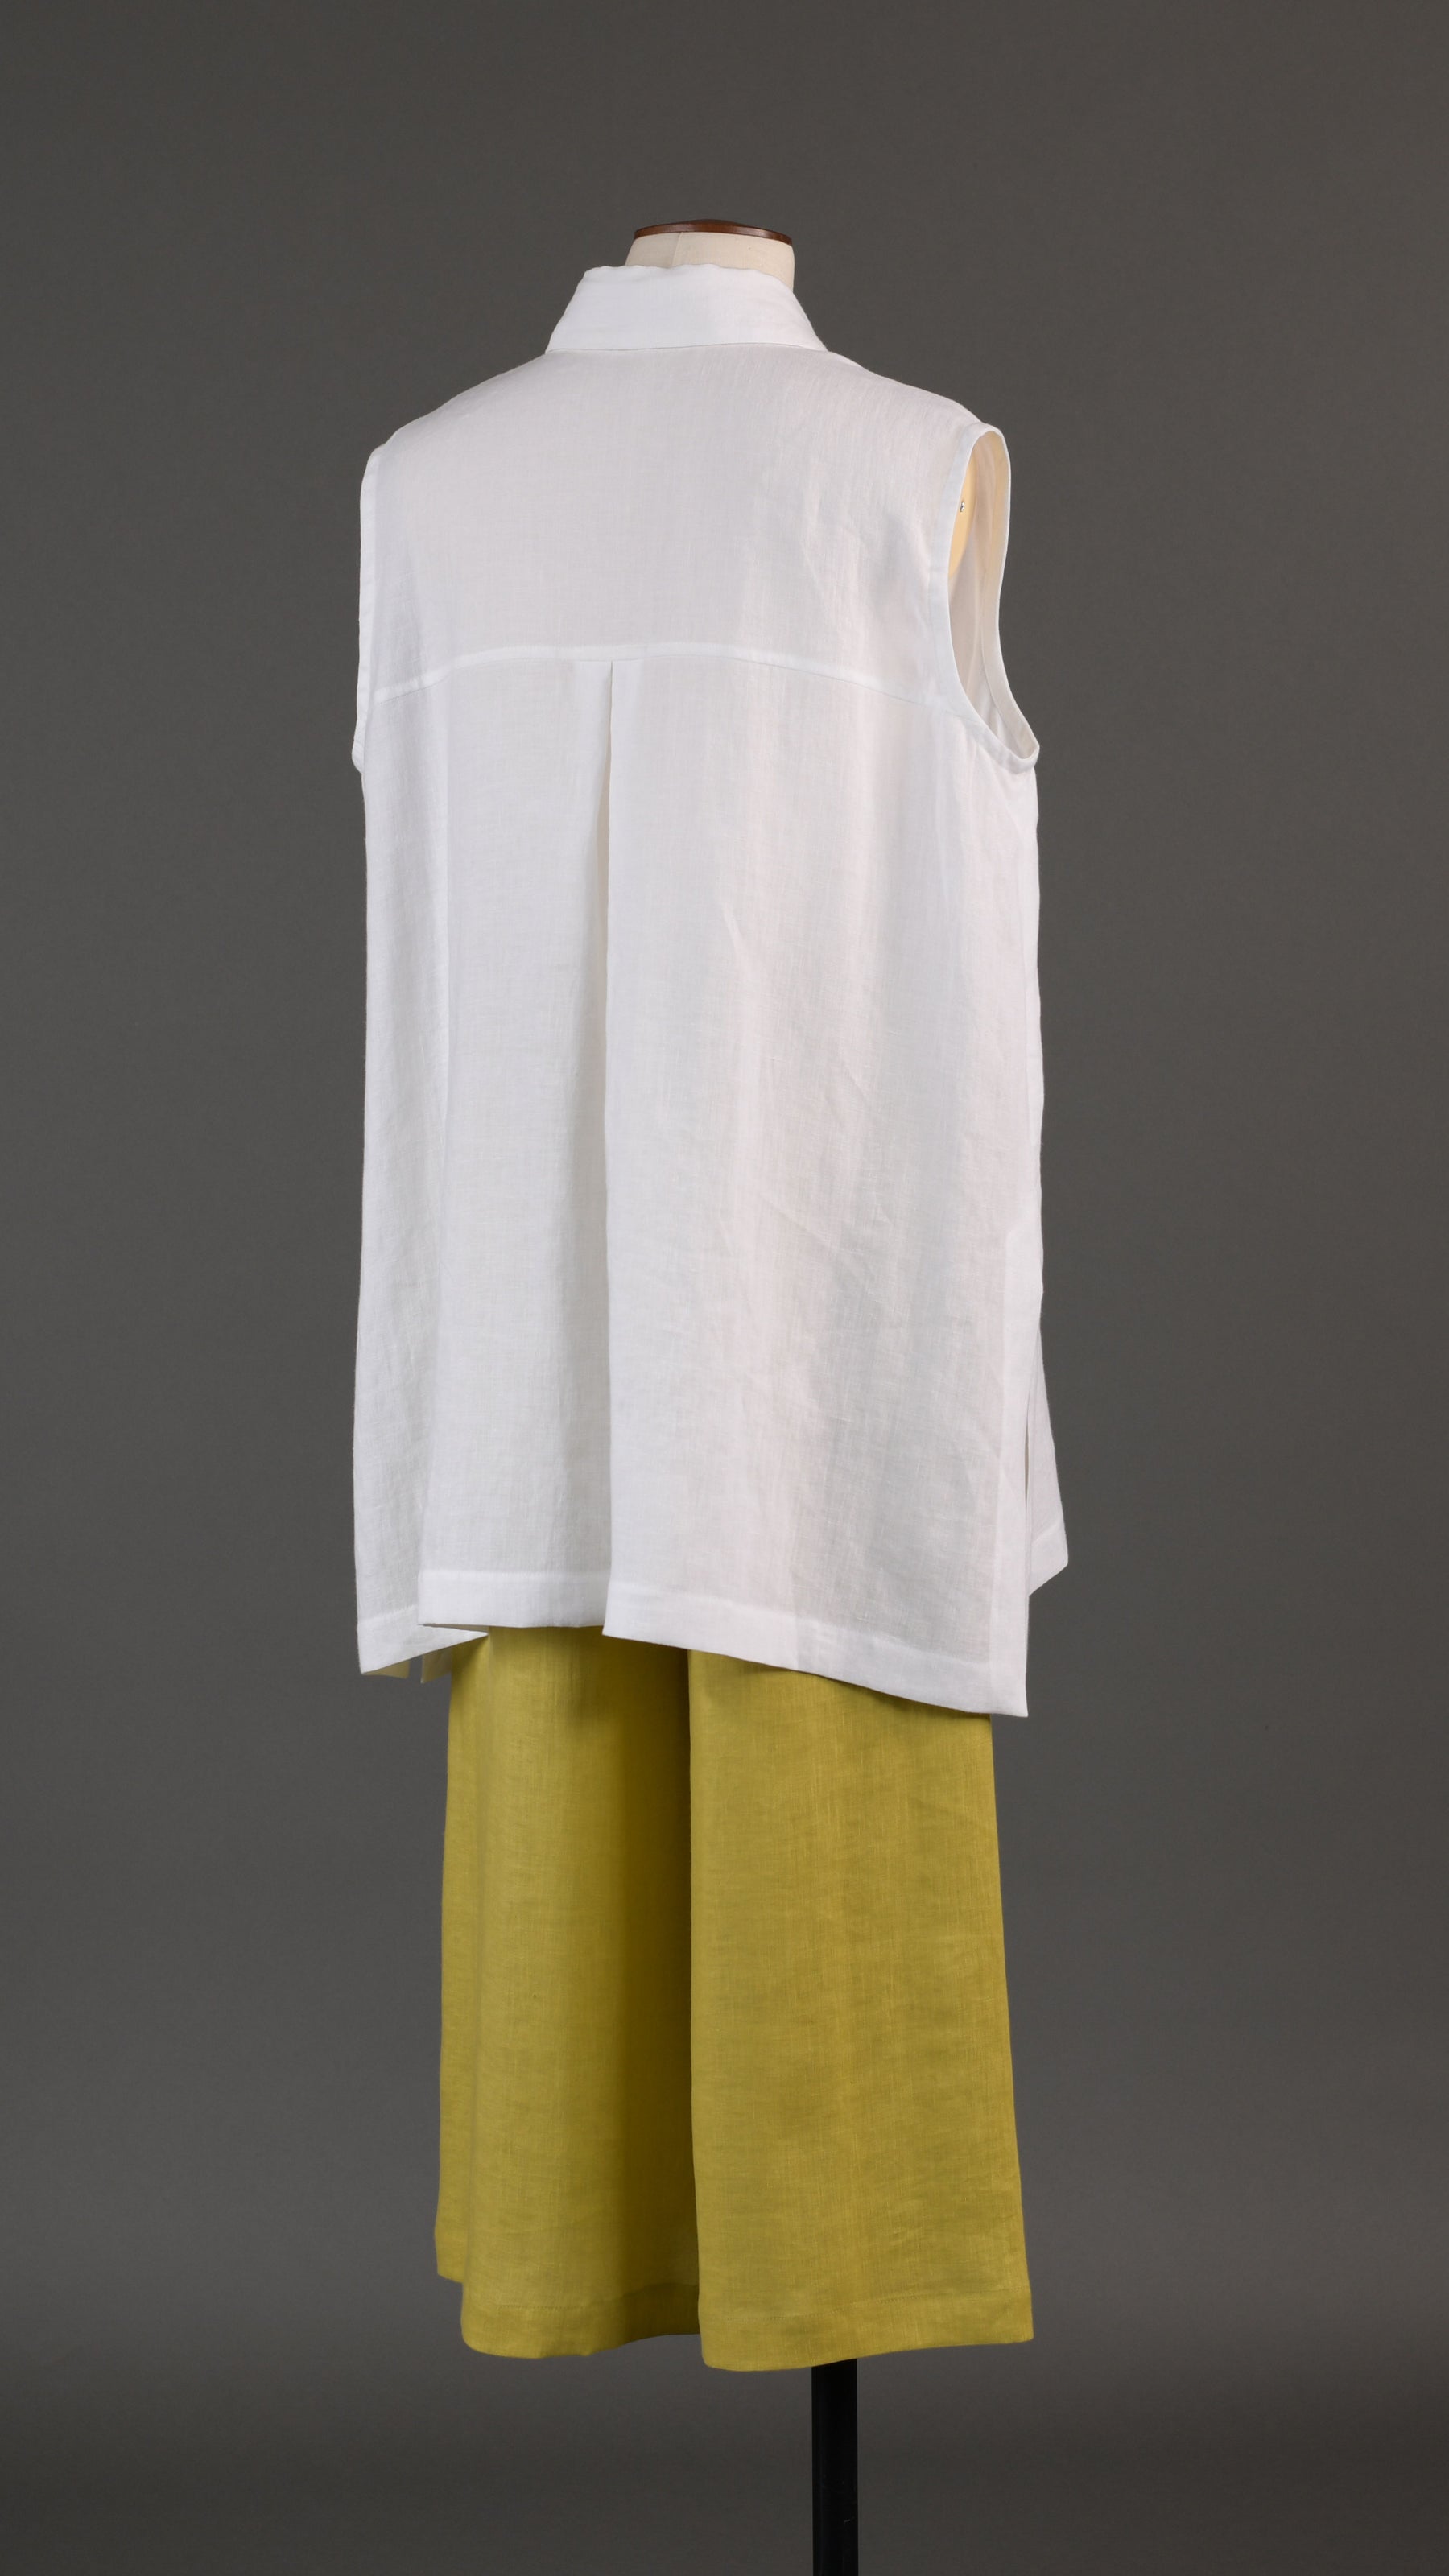 slim a-line sleeveless shirt with collar and side slit detail - long in white